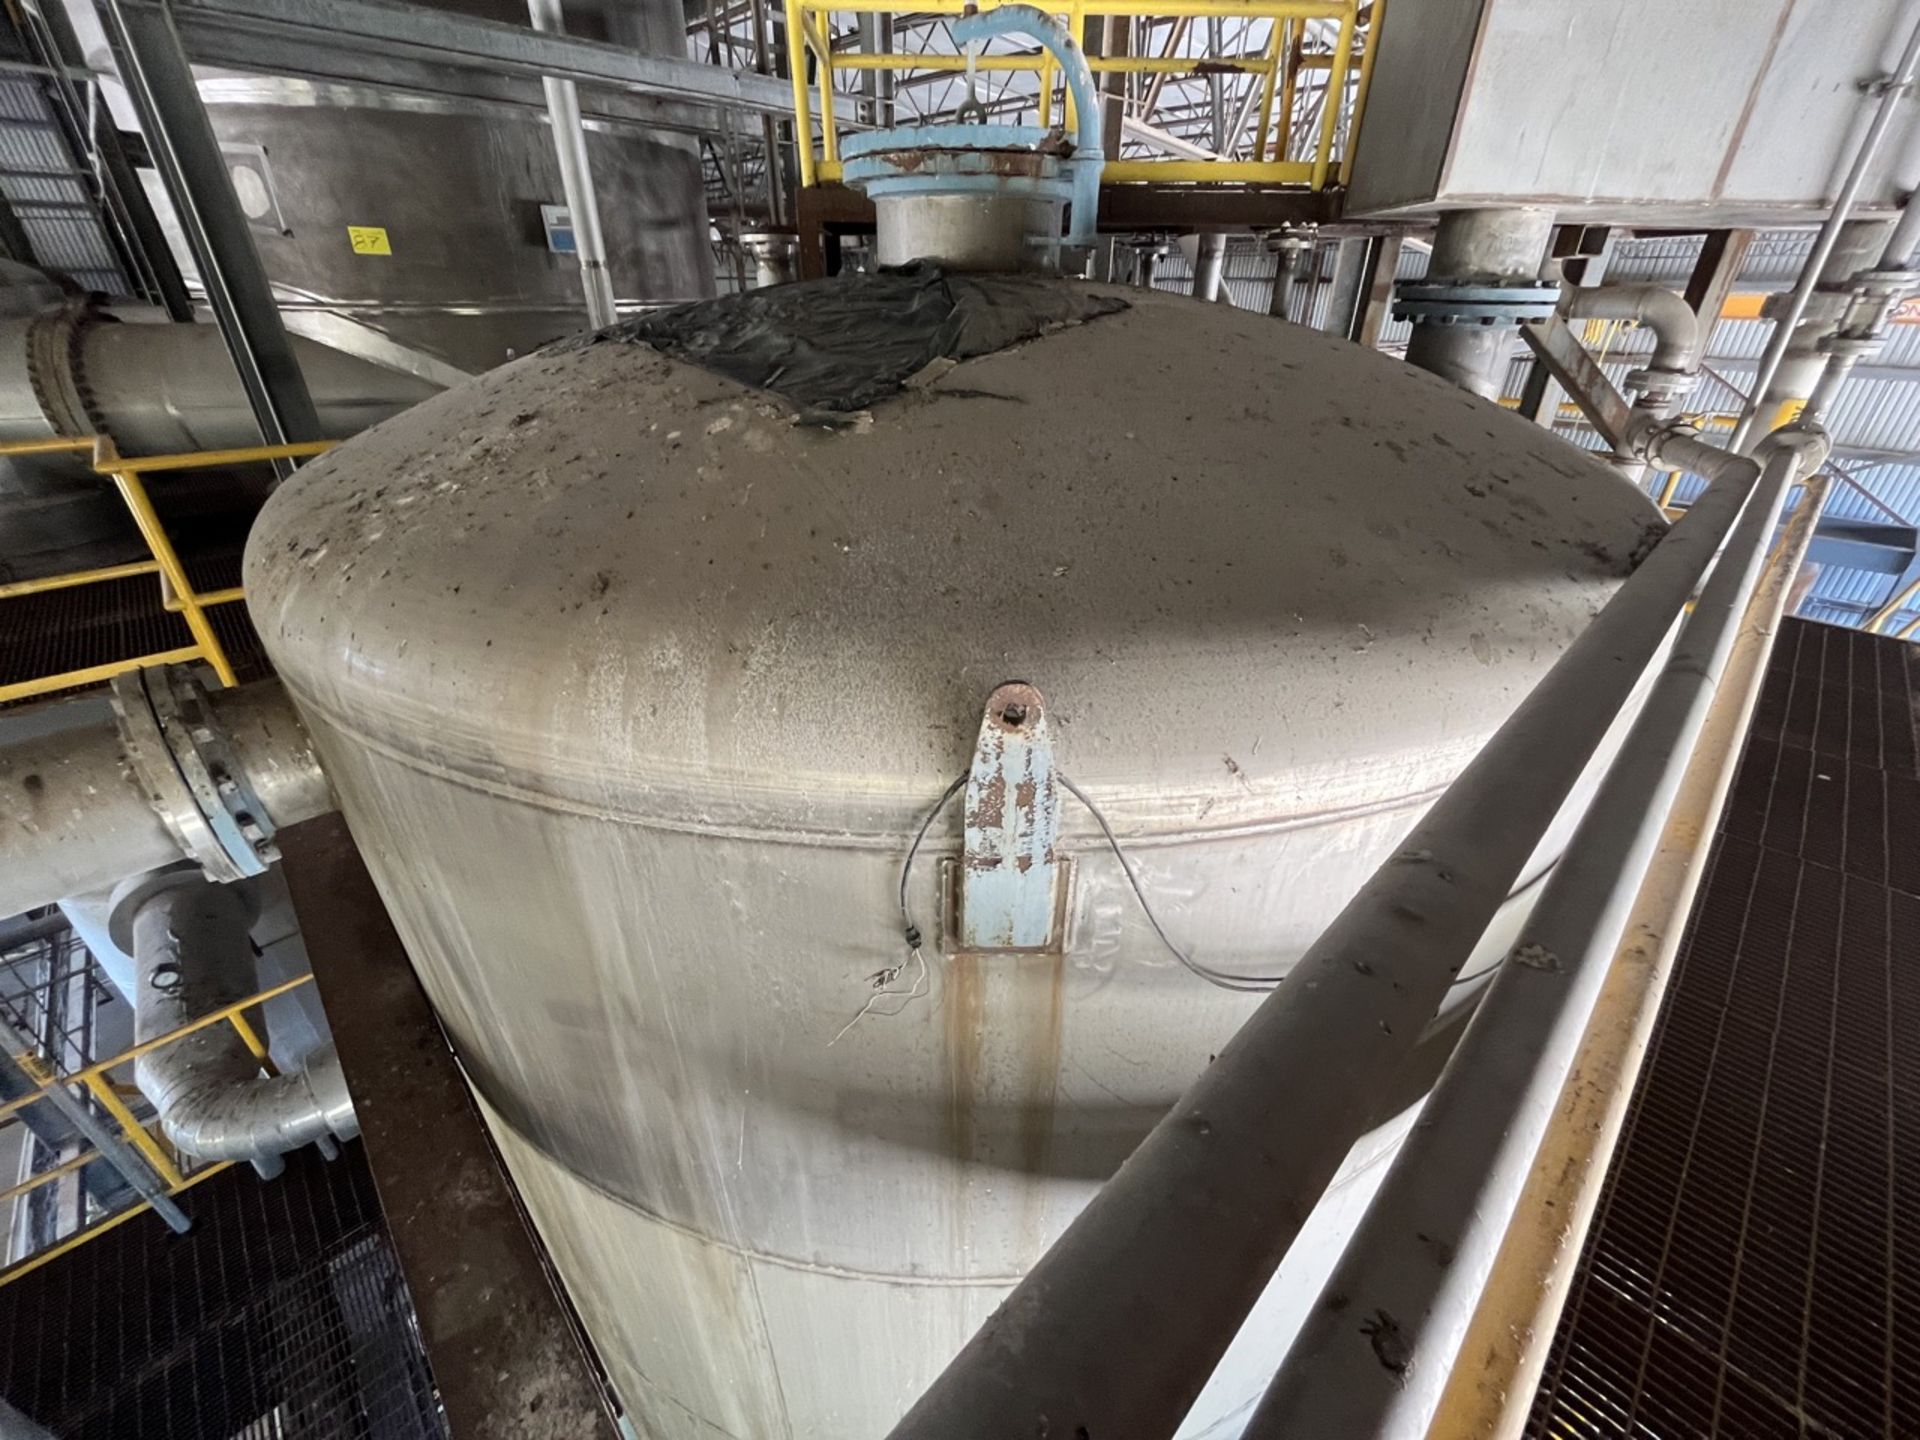 Conical storage tank with stainless steel toriesferica lid measures approximately 4.30 meters in di - Image 12 of 37